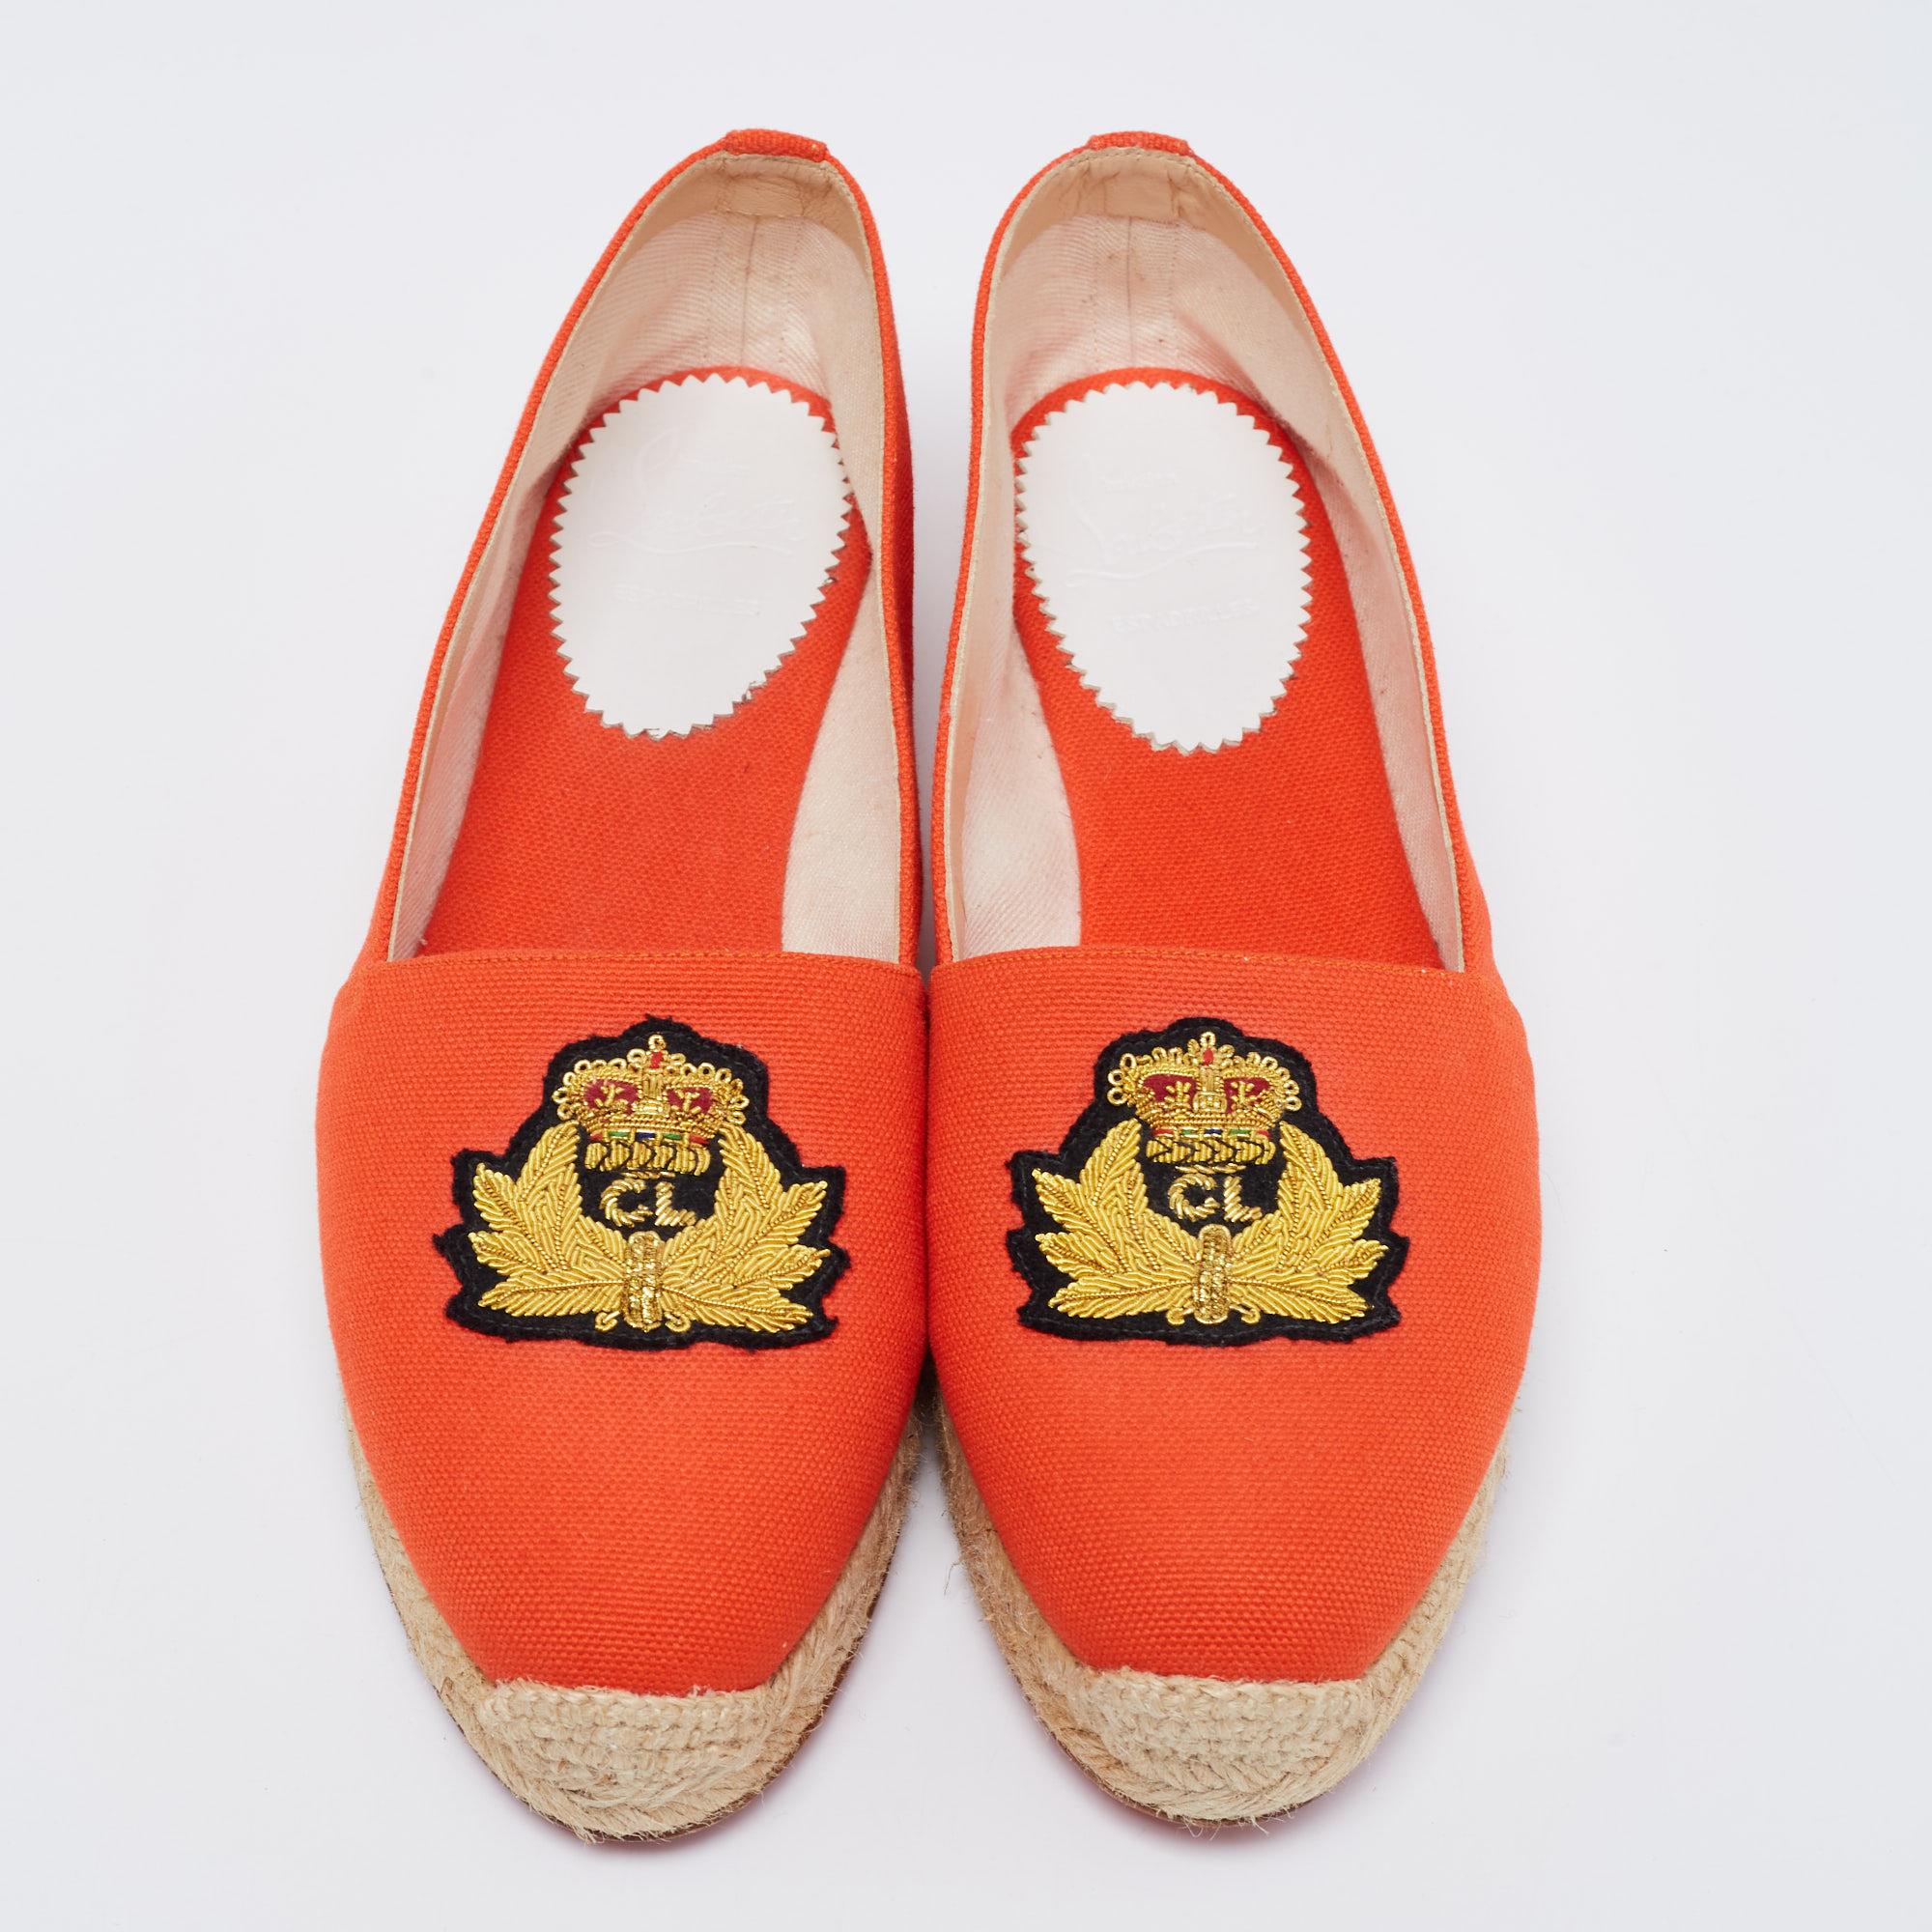 Christian Louboutin Orange Canvas Gala Embroidered Crest Espadrille Loafers In Good Condition For Sale In Dubai, Al Qouz 2